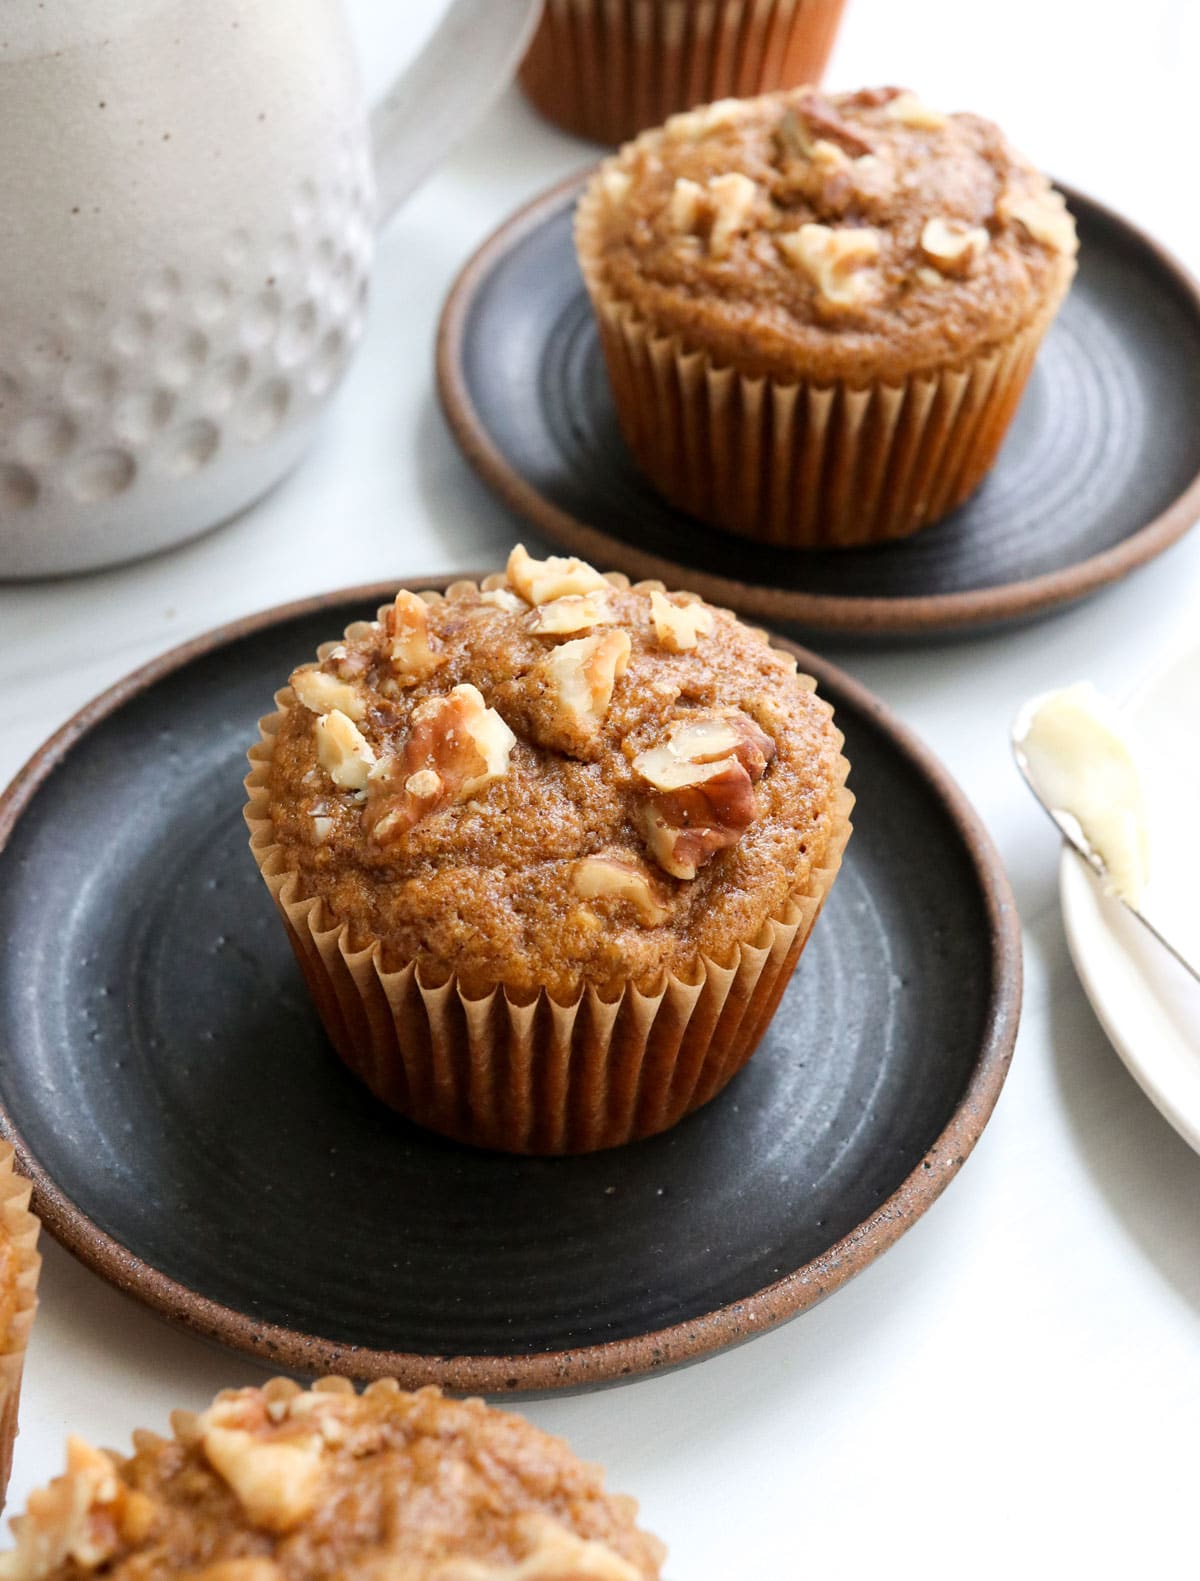 banana muffins with walnuts on top.